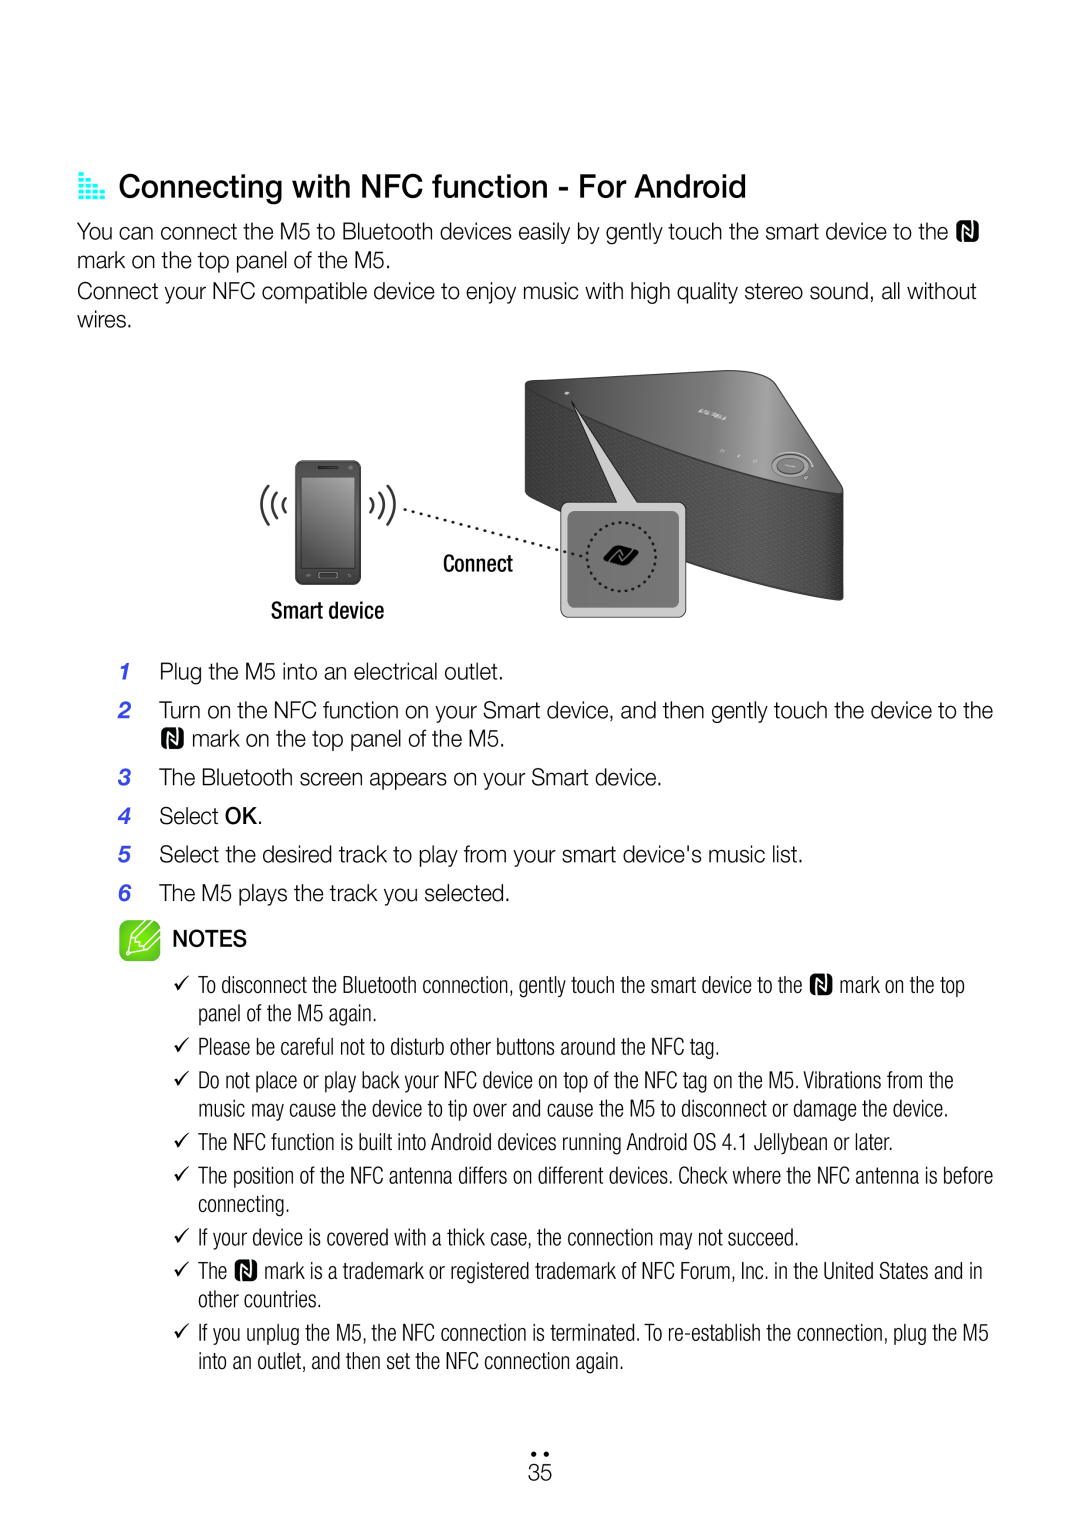 Samsung M5 user manual AA Connecting with NFC function - For Android 